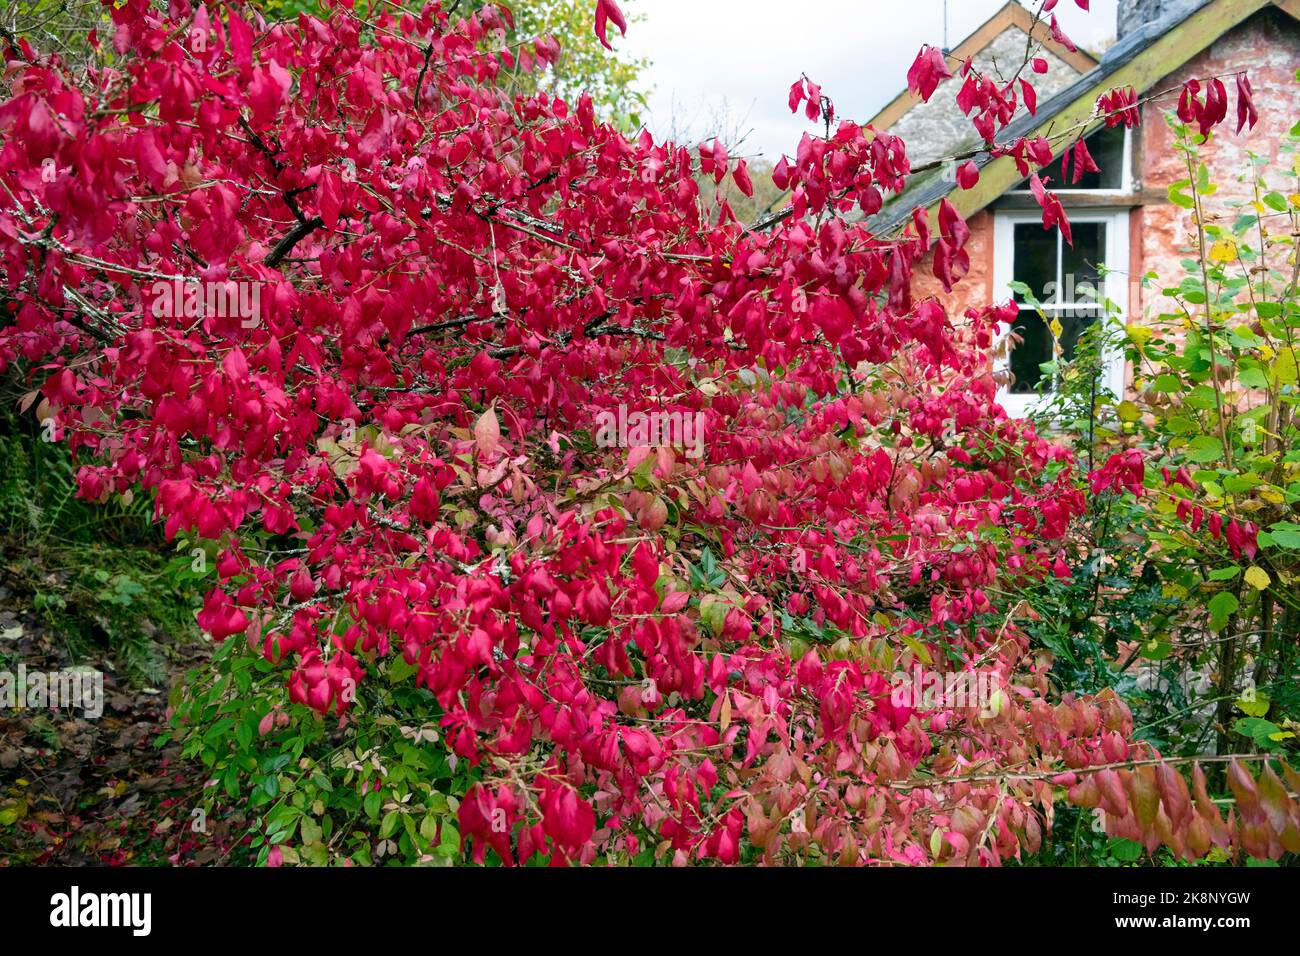 Eunonymous alatus red leaved wing spindle or fire bush outside pink country cottage house home in autumn rural Carmarthenshire Wales UK  KATHY DEWITT Stock Photo